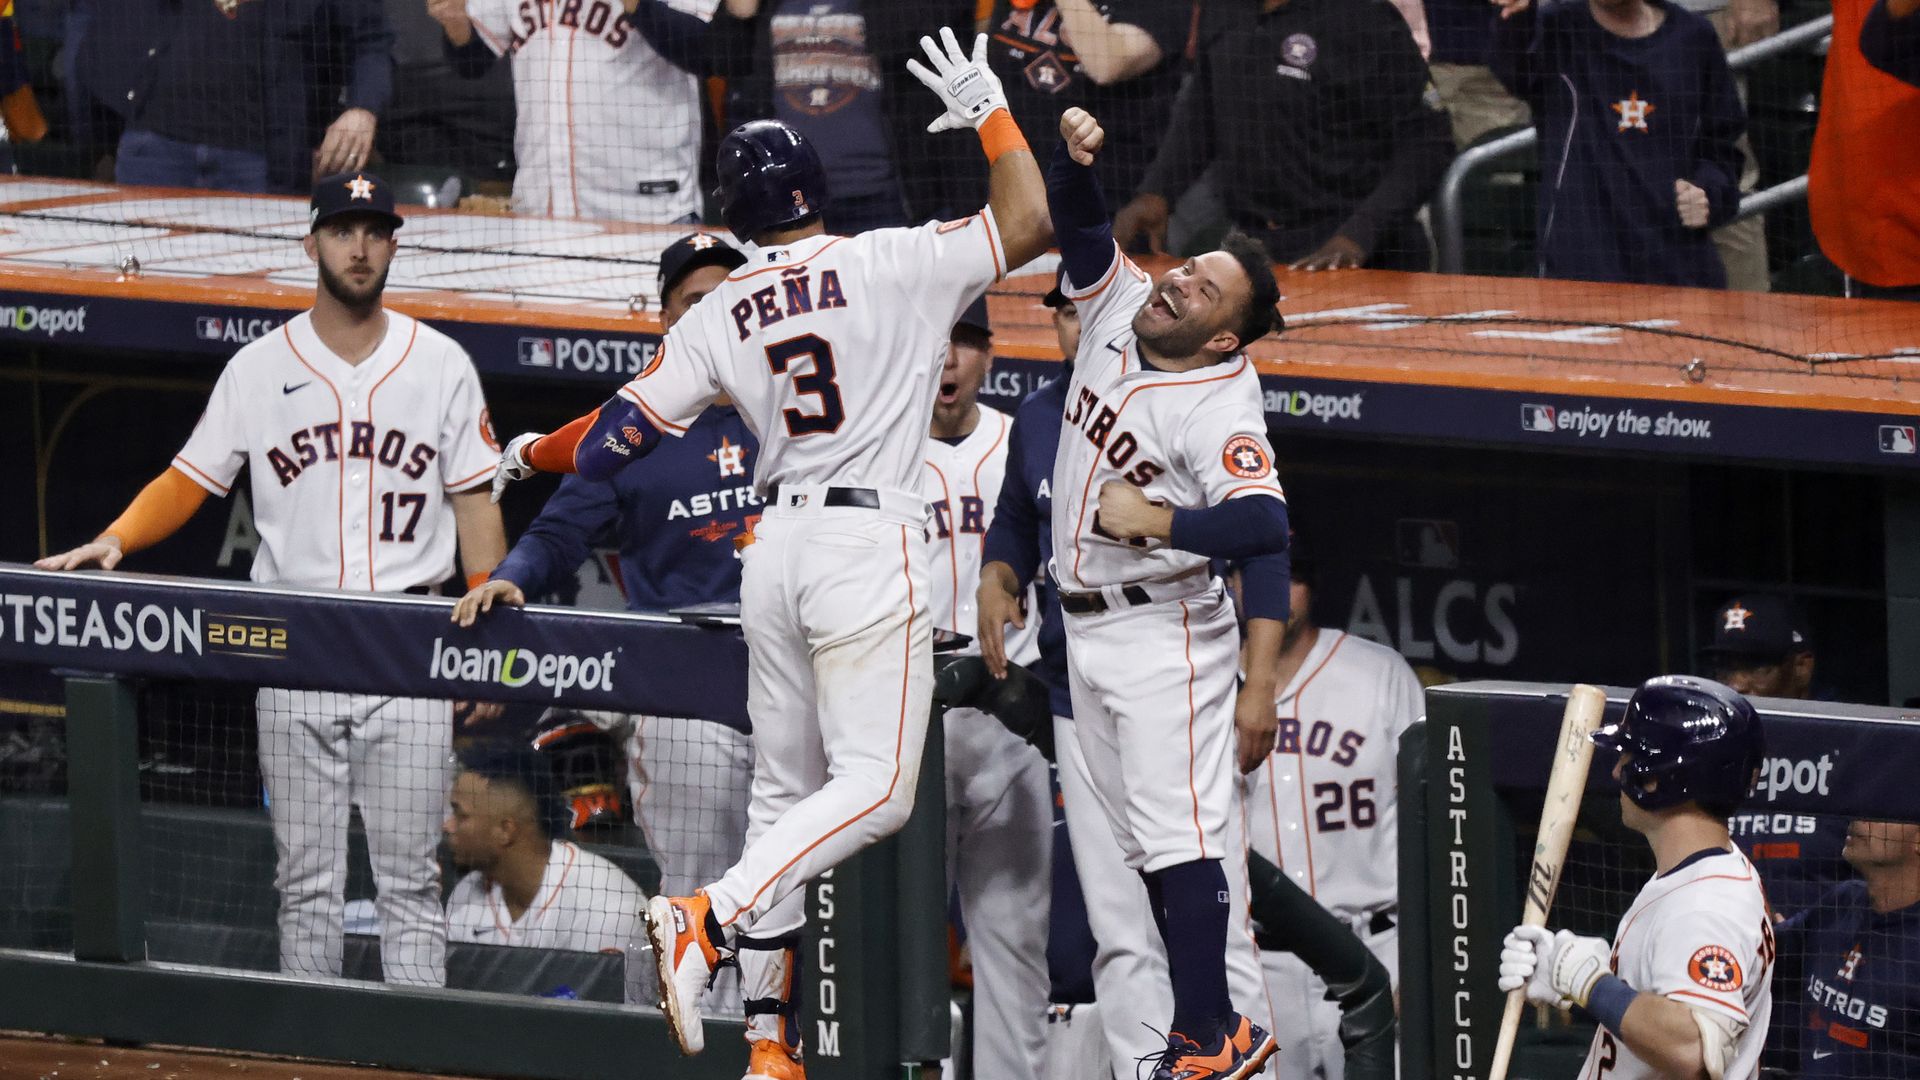 Houston Astros ALCS schedule: Dates, what to know, how to buy tickets